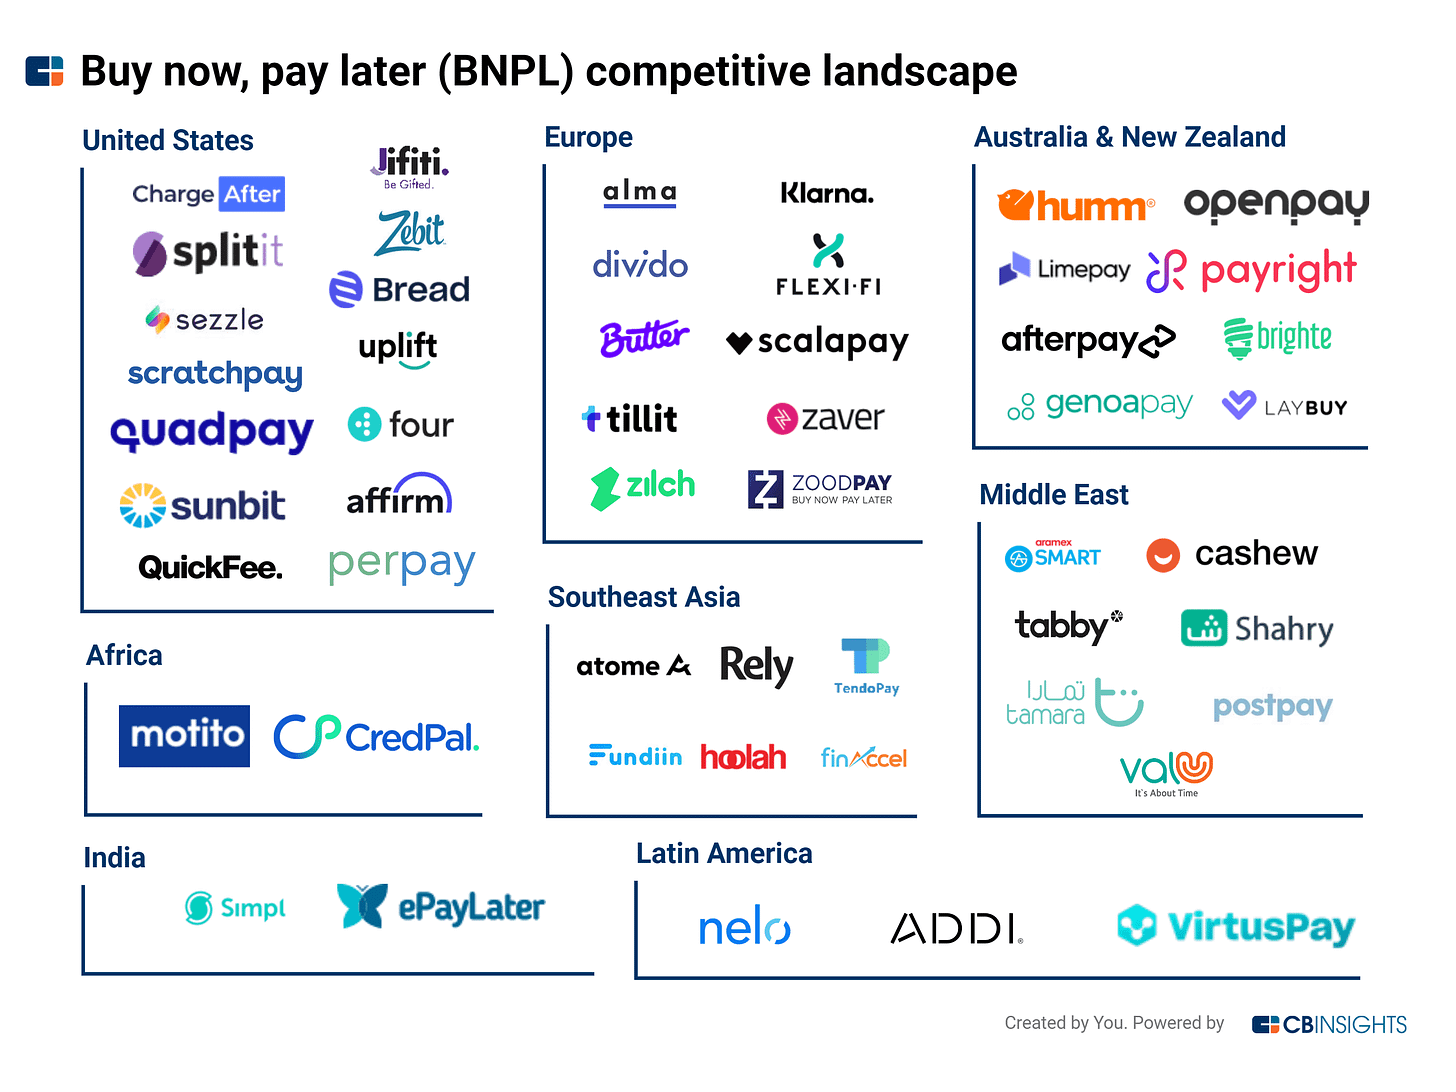 50+ Companies Pushing Buy Now, Pay Later Across The World - CB Insights  Research